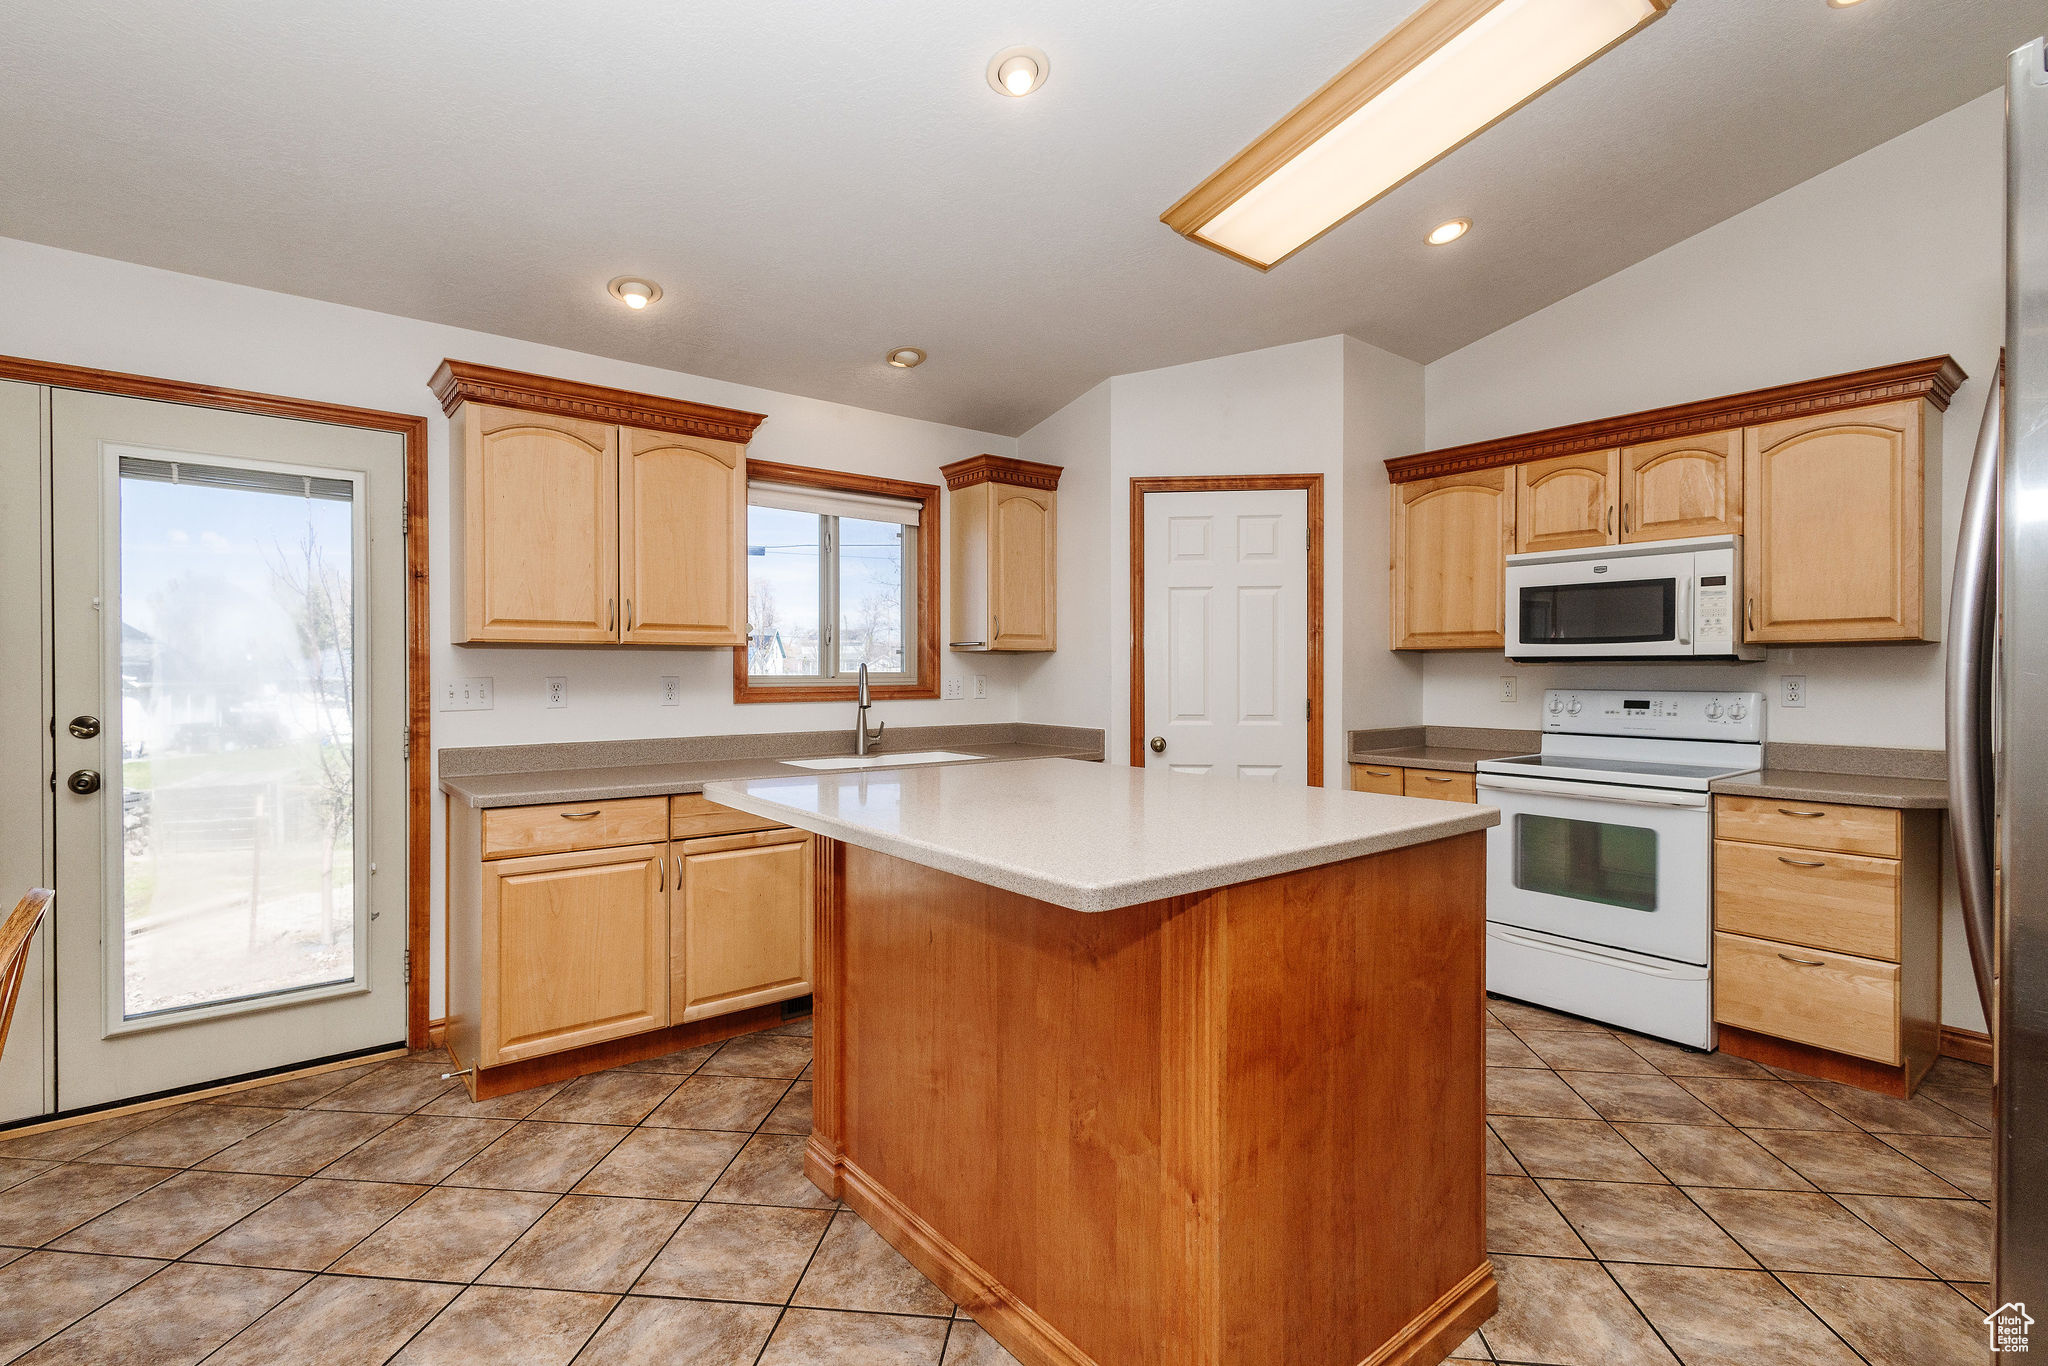 Kitchen with island, light tile floors, white appliances, and vaulted ceiling.  Open to semi-formal dining that open to great room.